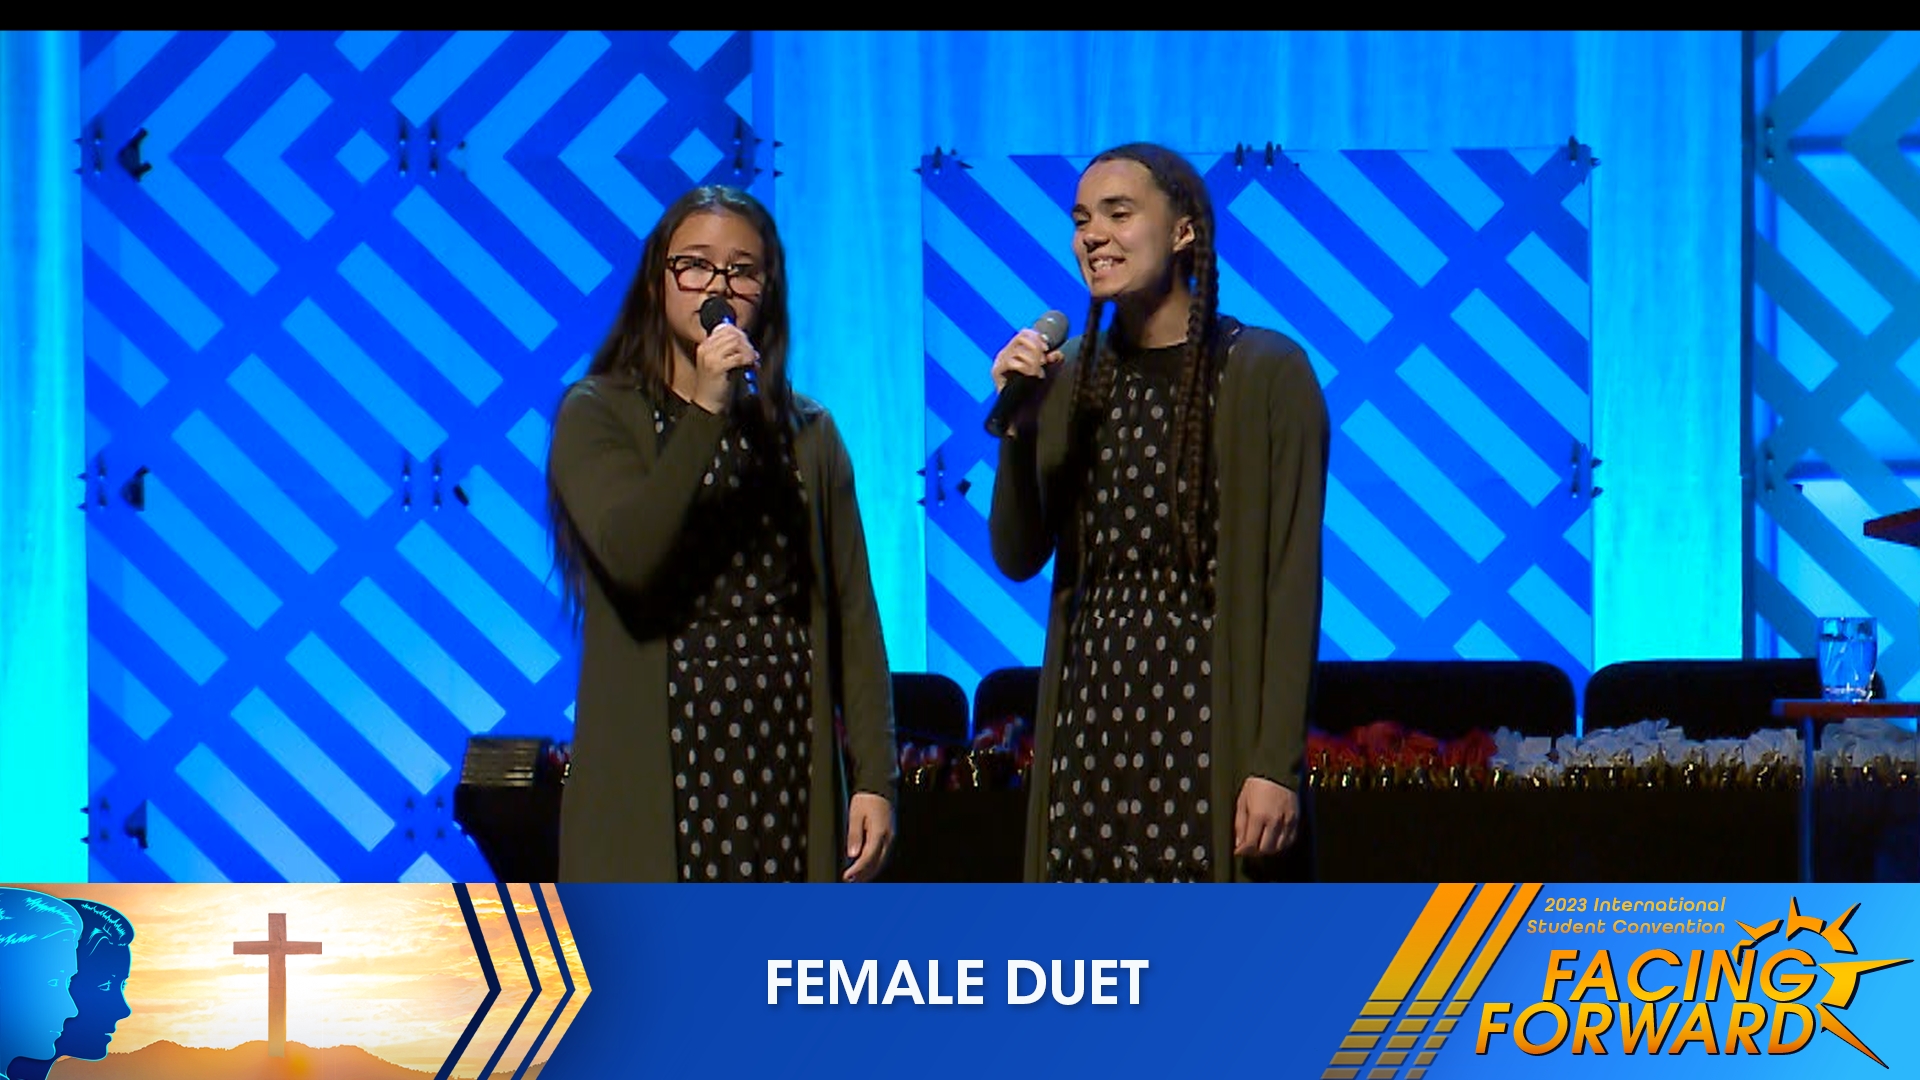 Female Duet, "People Need the Lord" - ISC 2023